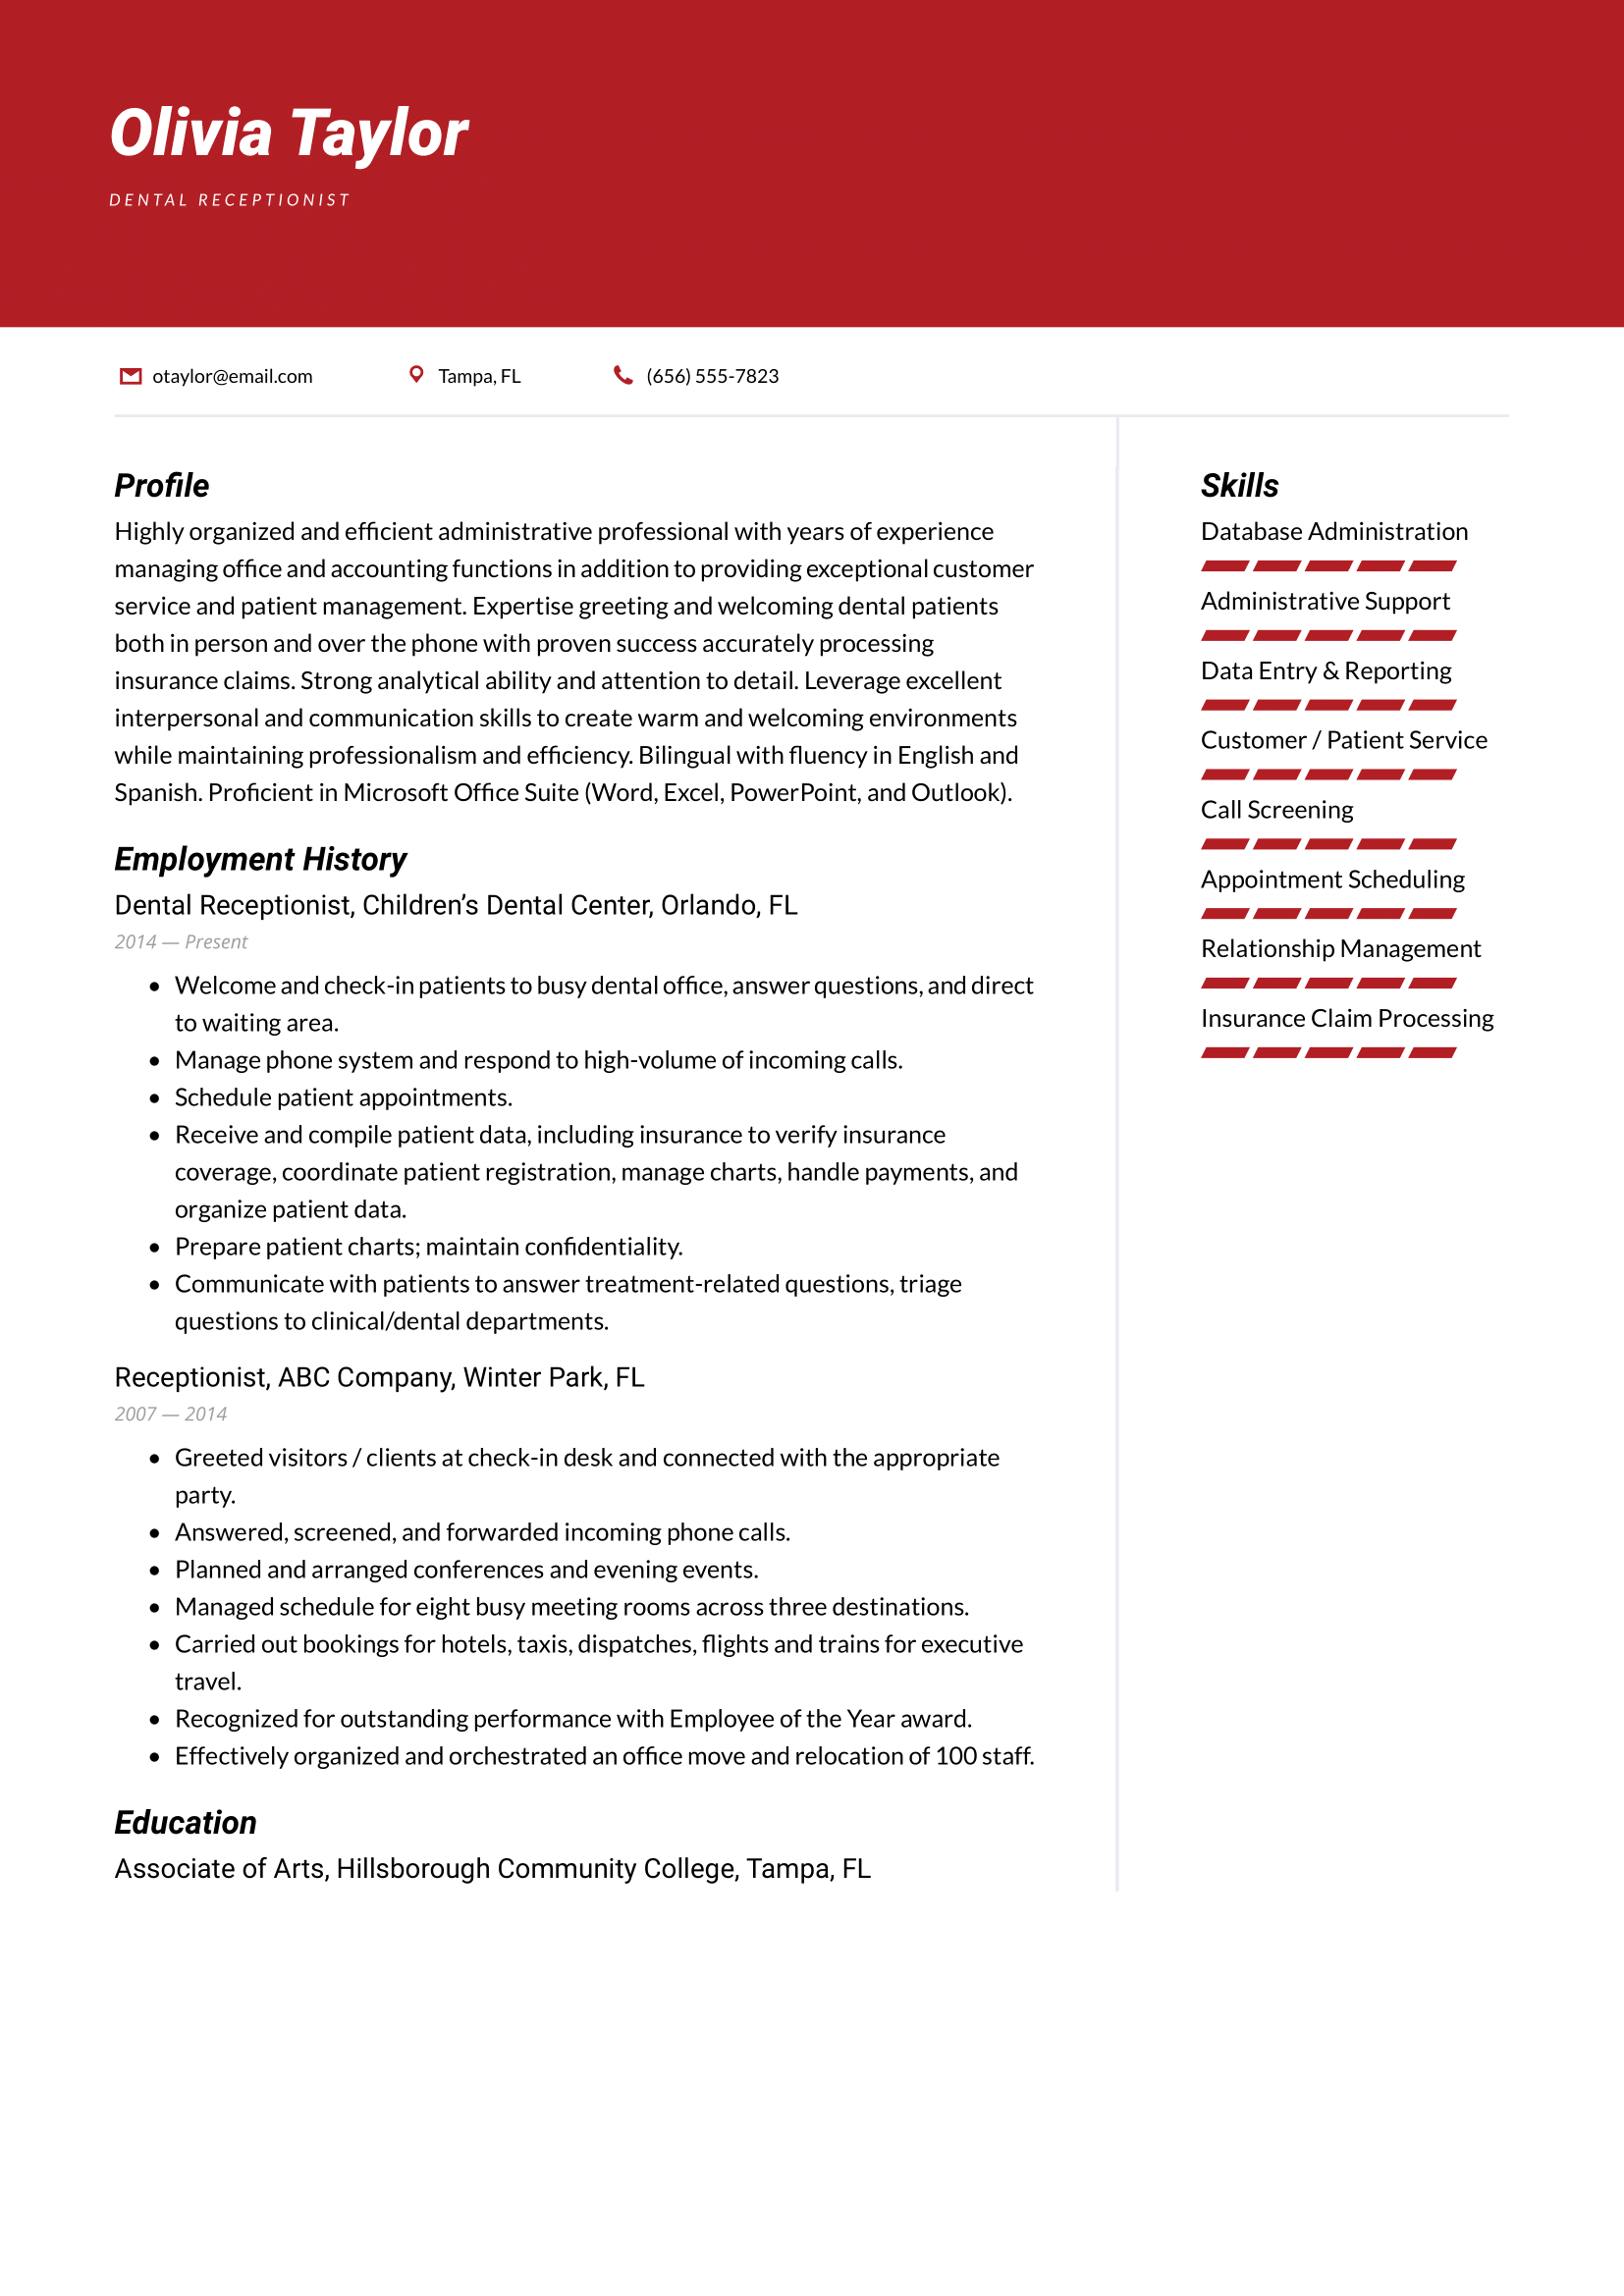 Dental Receptionist Resume Example & Writing Guide